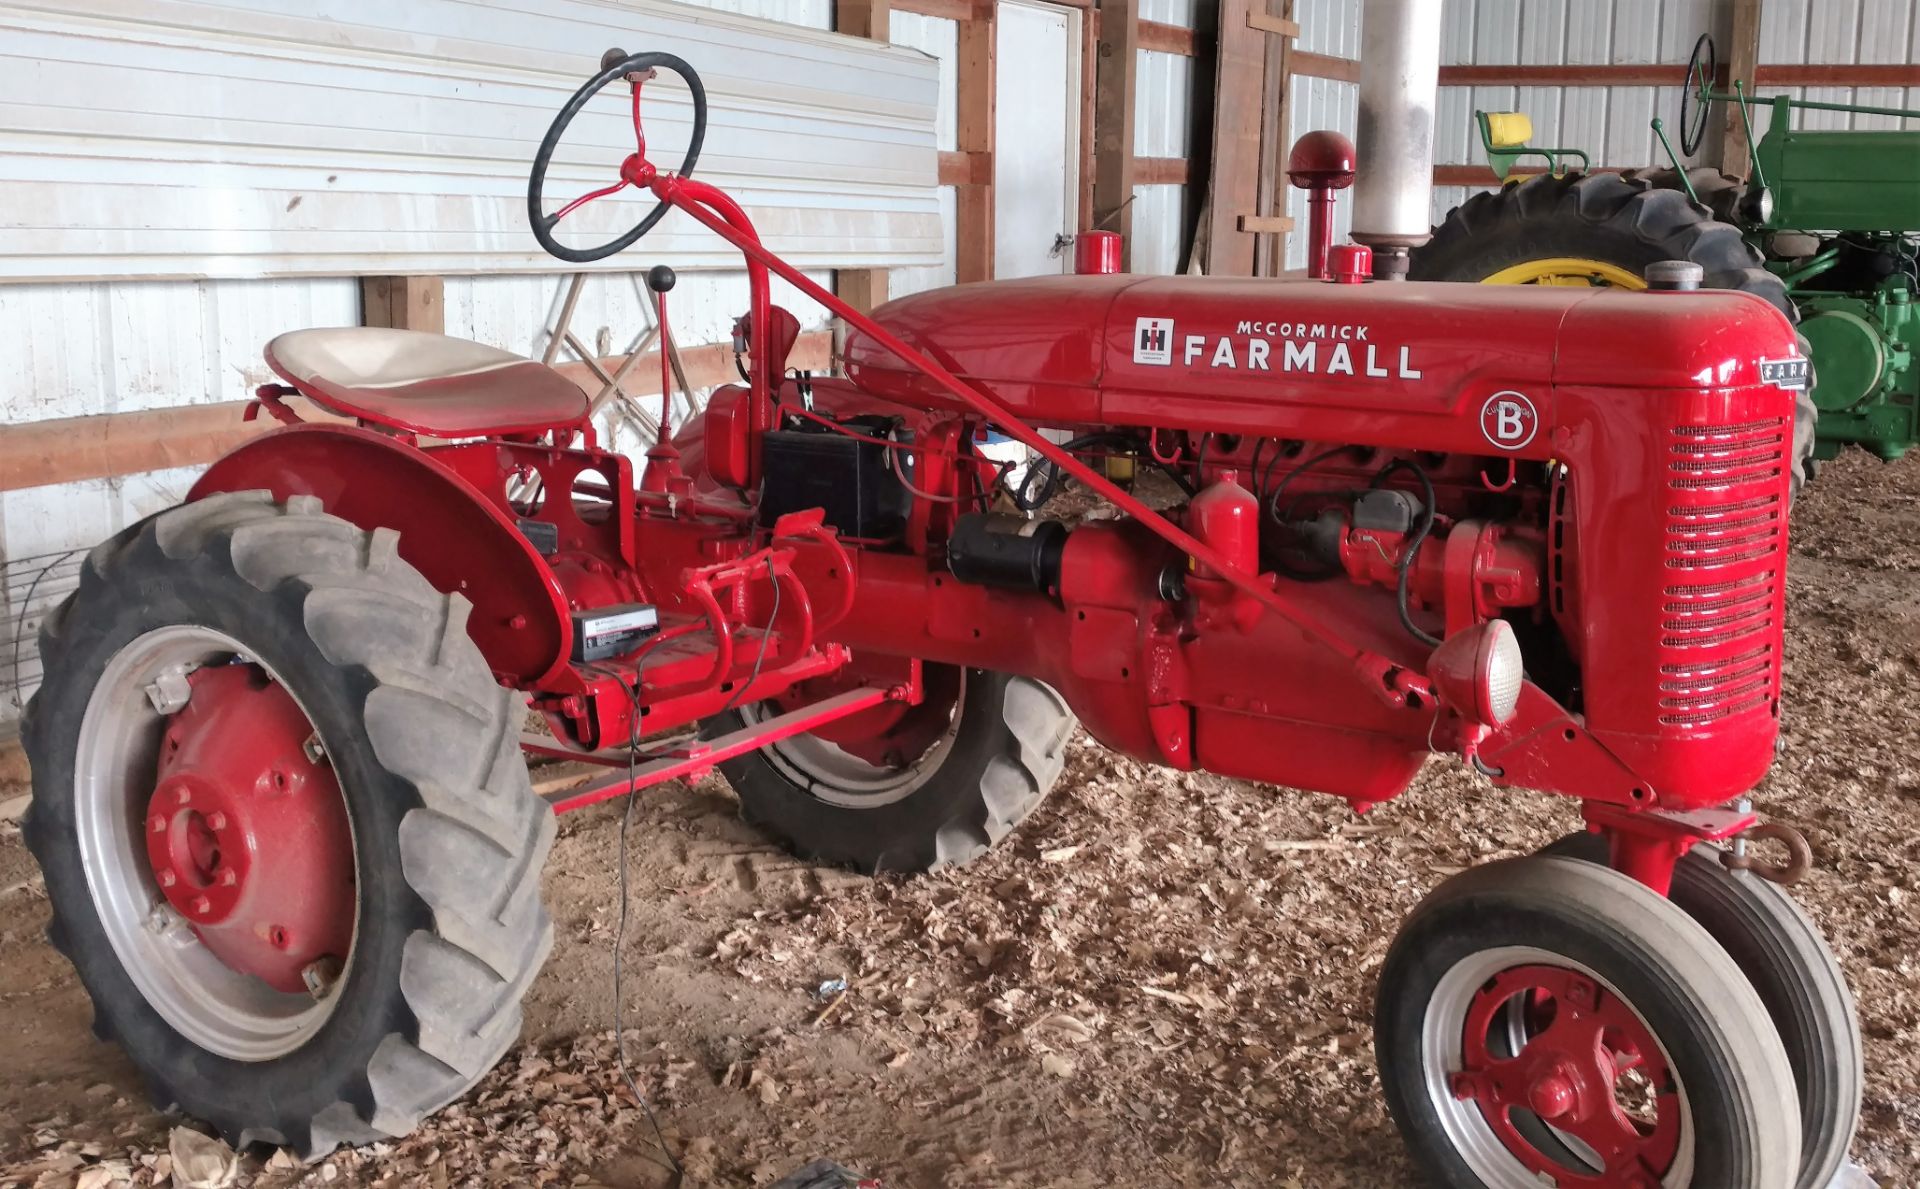 I.H. Farmall "B" Tractor, Completely Restored (Parade Ready)